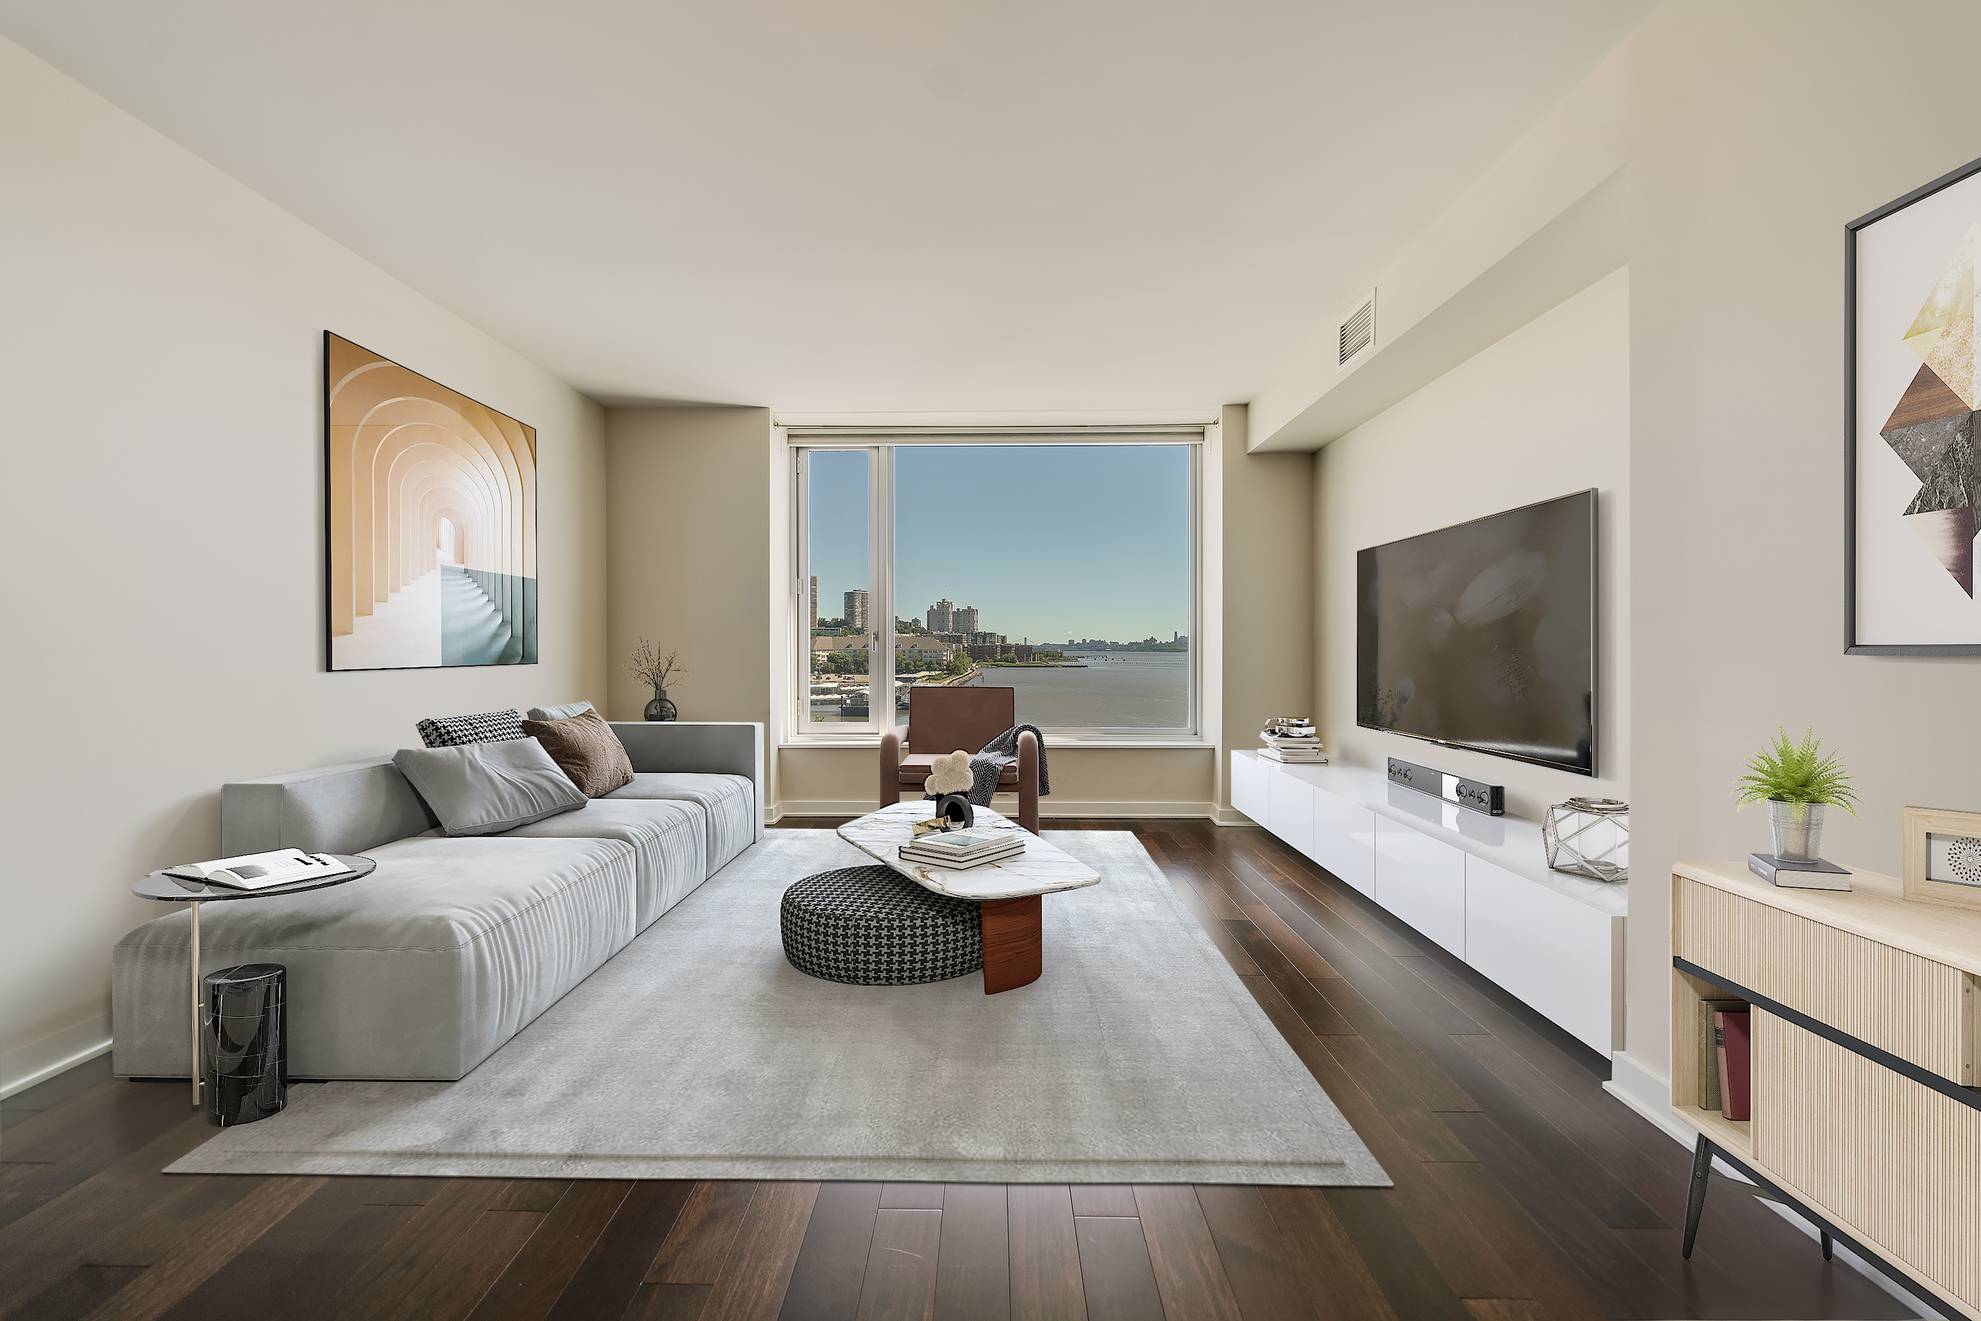 2 Bedroom Waterfront Condo For Sale - NYC  & Water Views